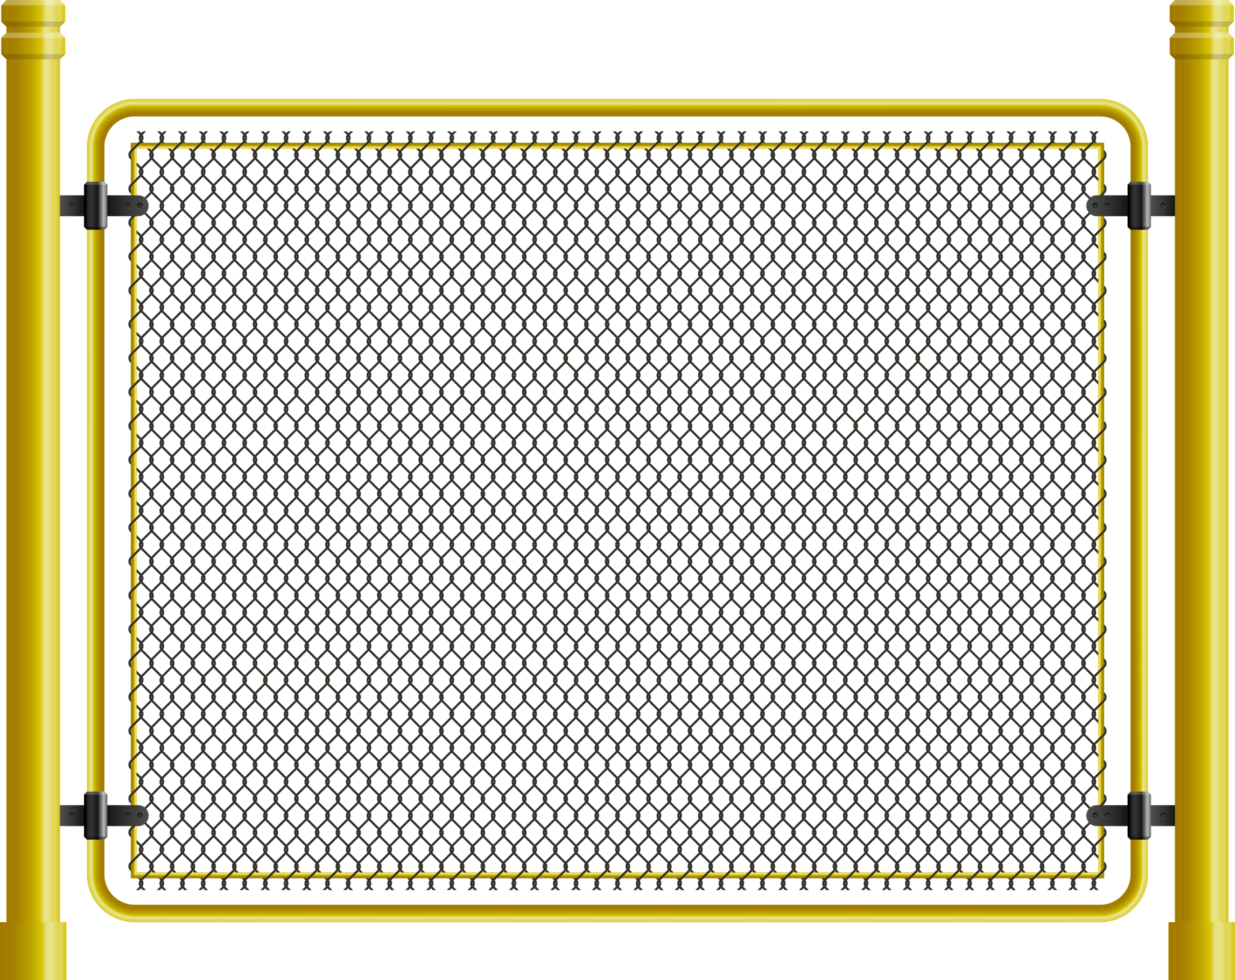 Metal wire fence and gate clip art png